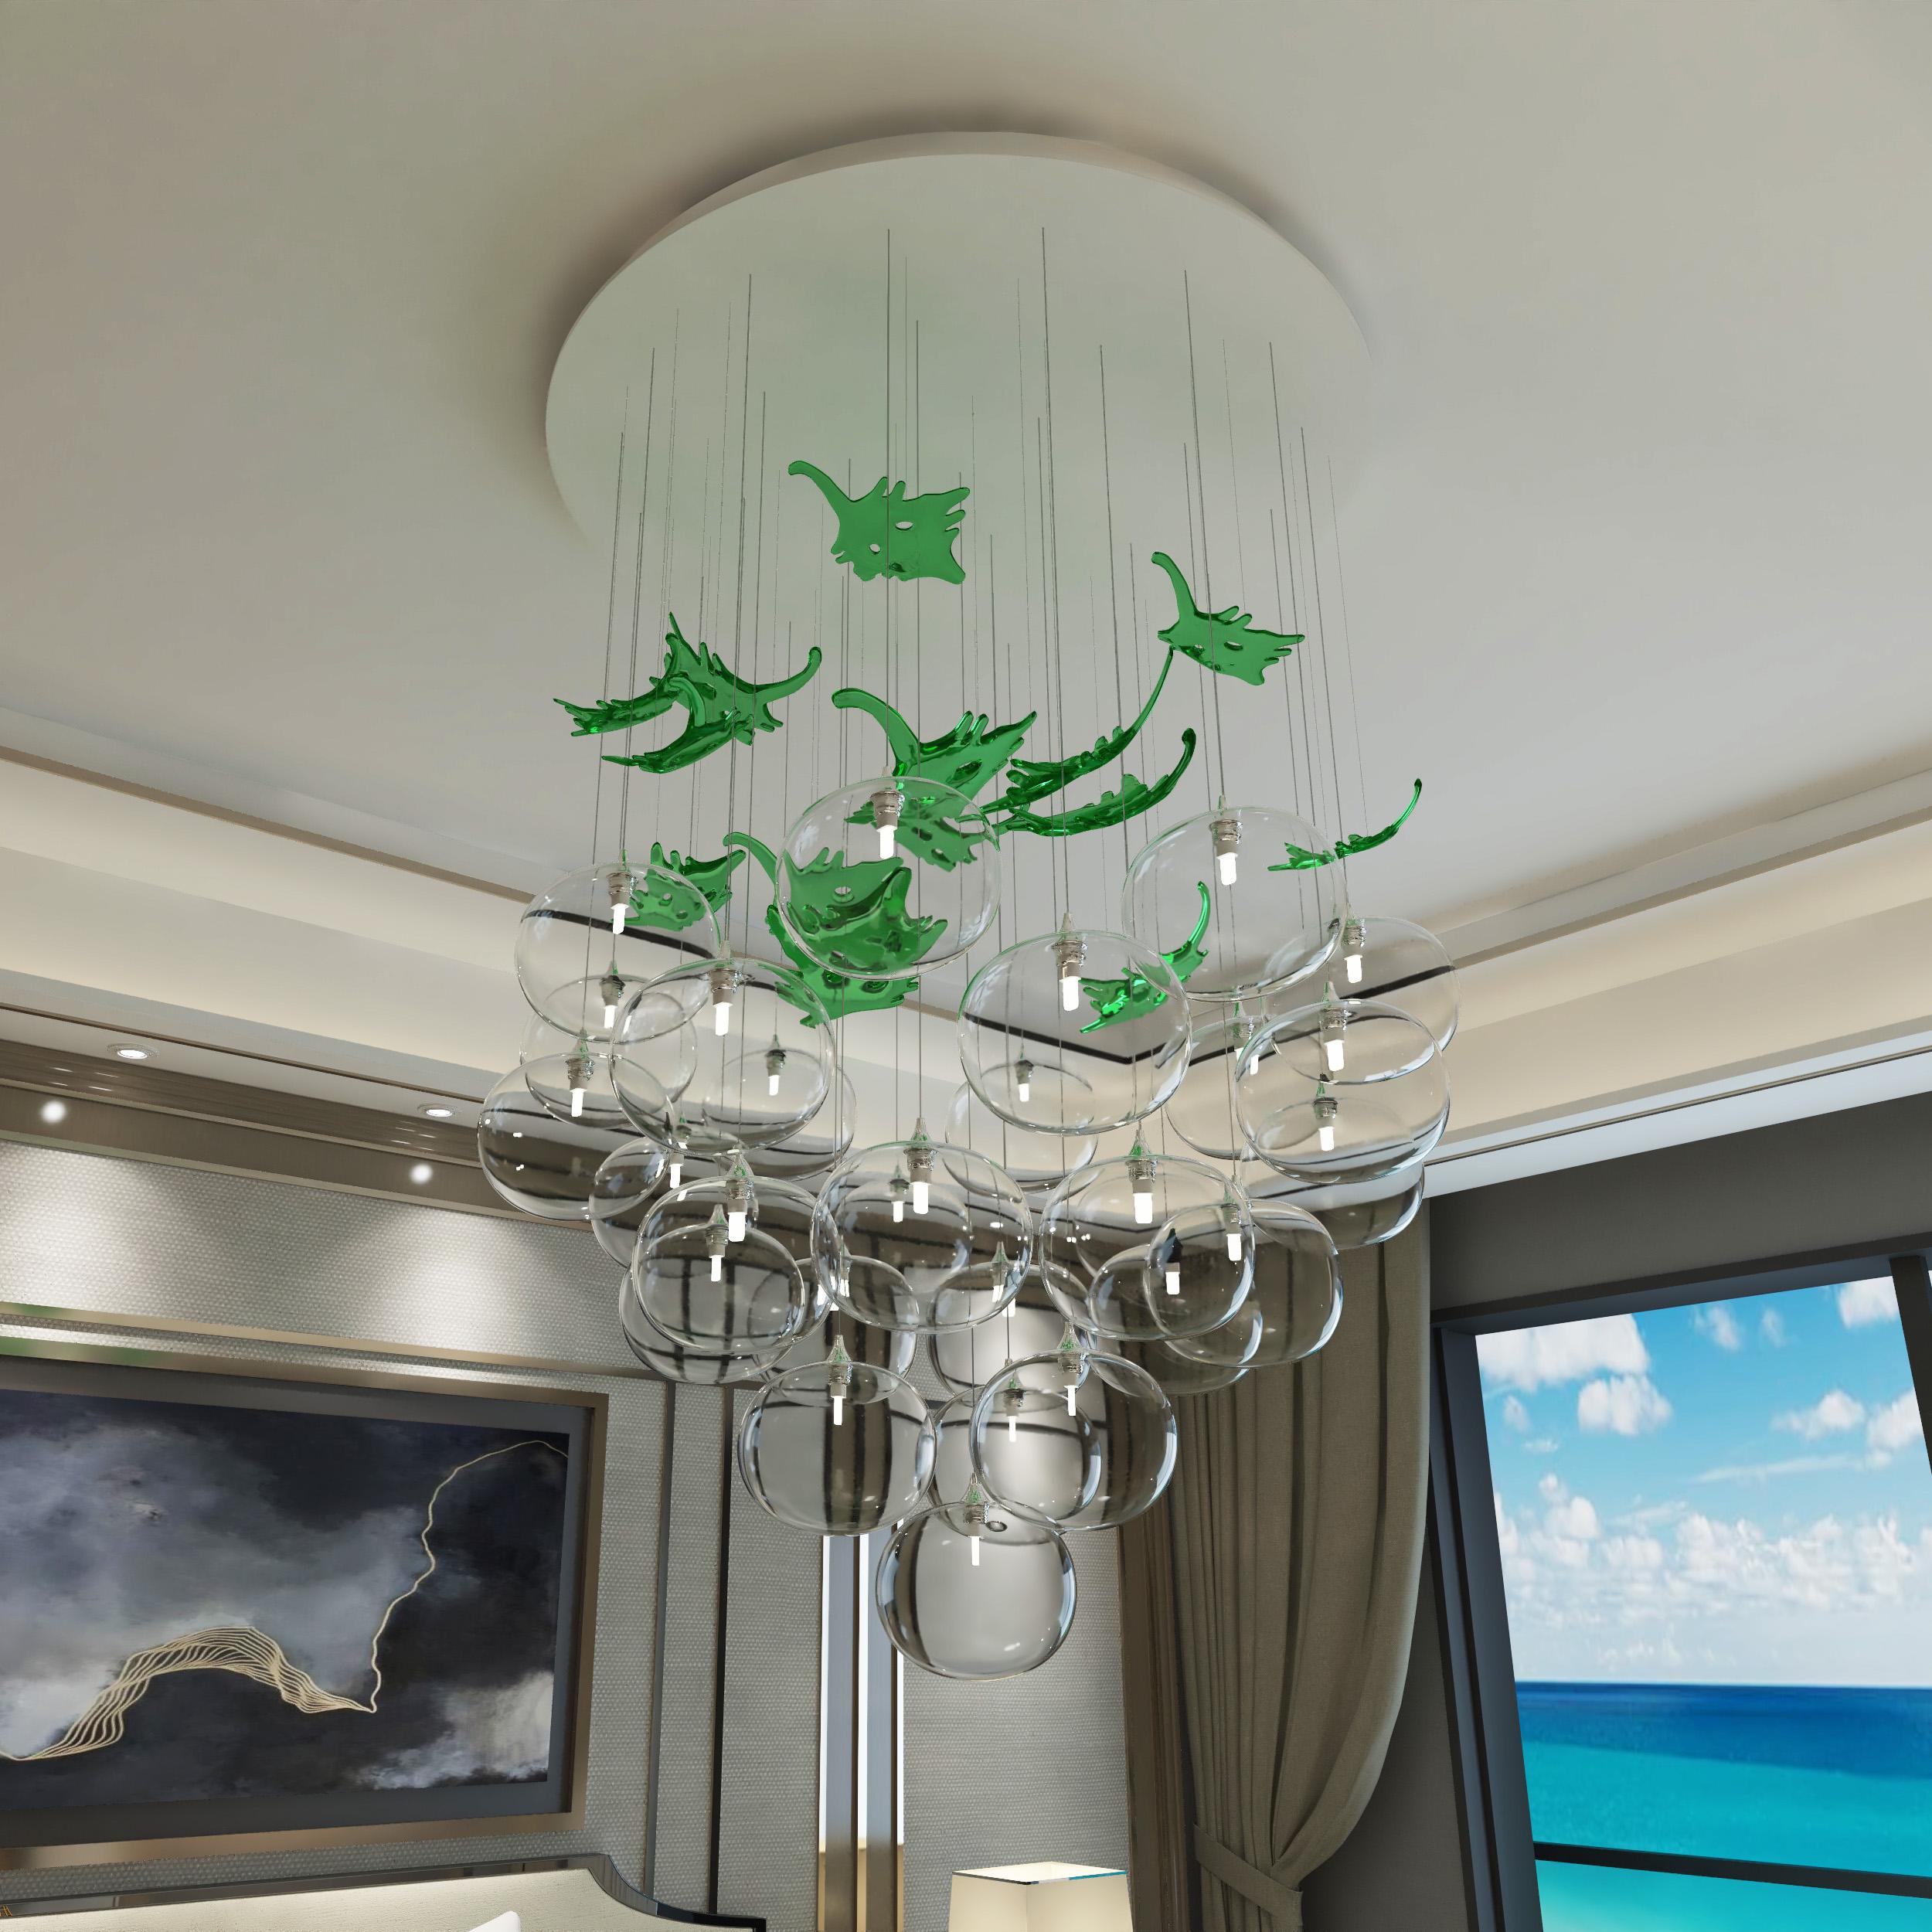 Introducing Vigneto, an exquisite chandelier that combines elegance, craftsmanship, and nature-inspired beauty. This exceptional lighting fixture features 28 hand-blown glass globe pendants meticulously arranged to form a captivating grape bundle